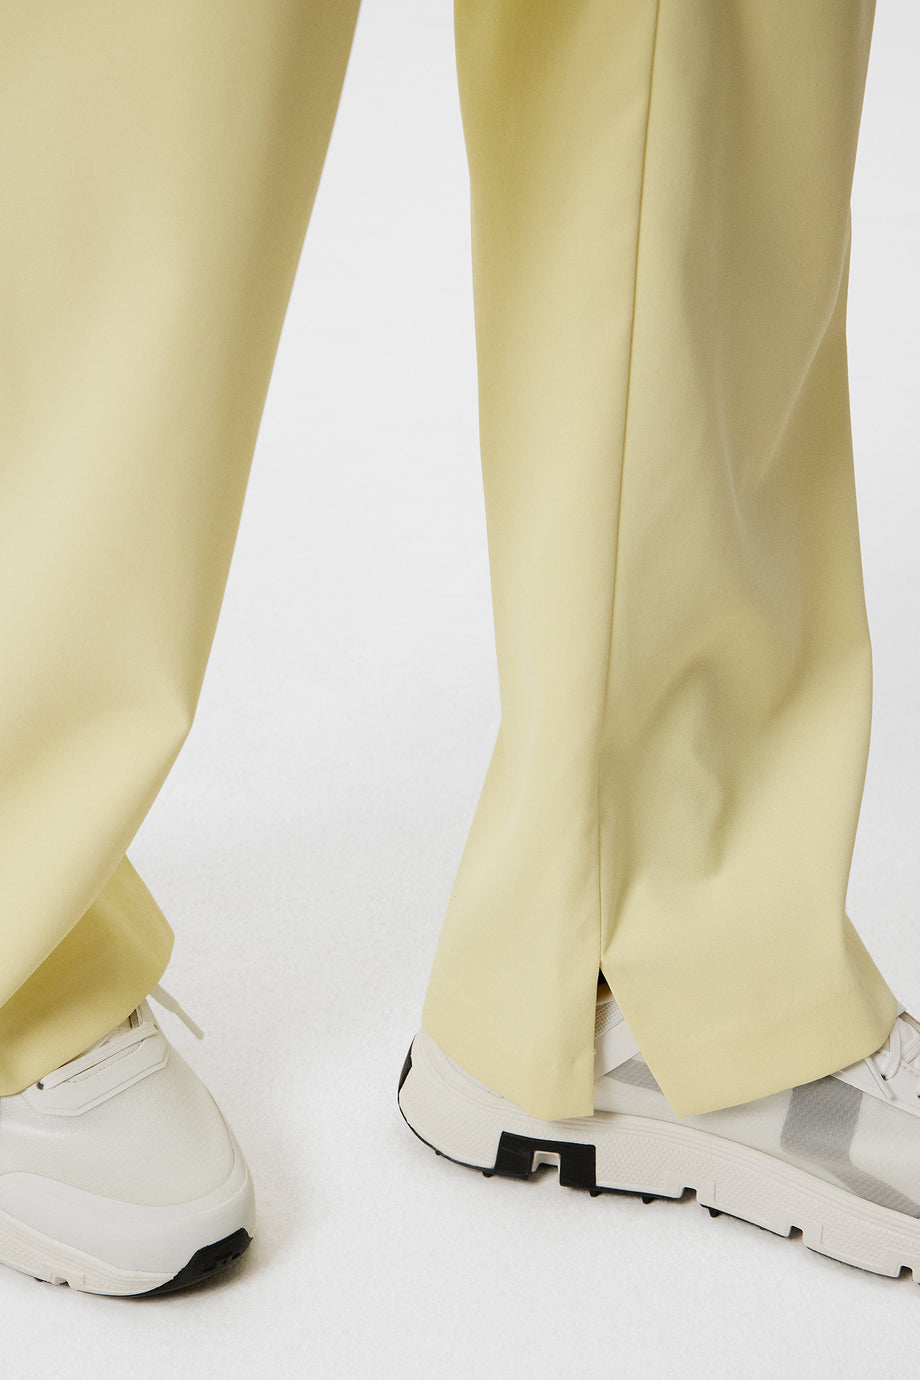 Fiona Pull On Pant / Wax Yellow